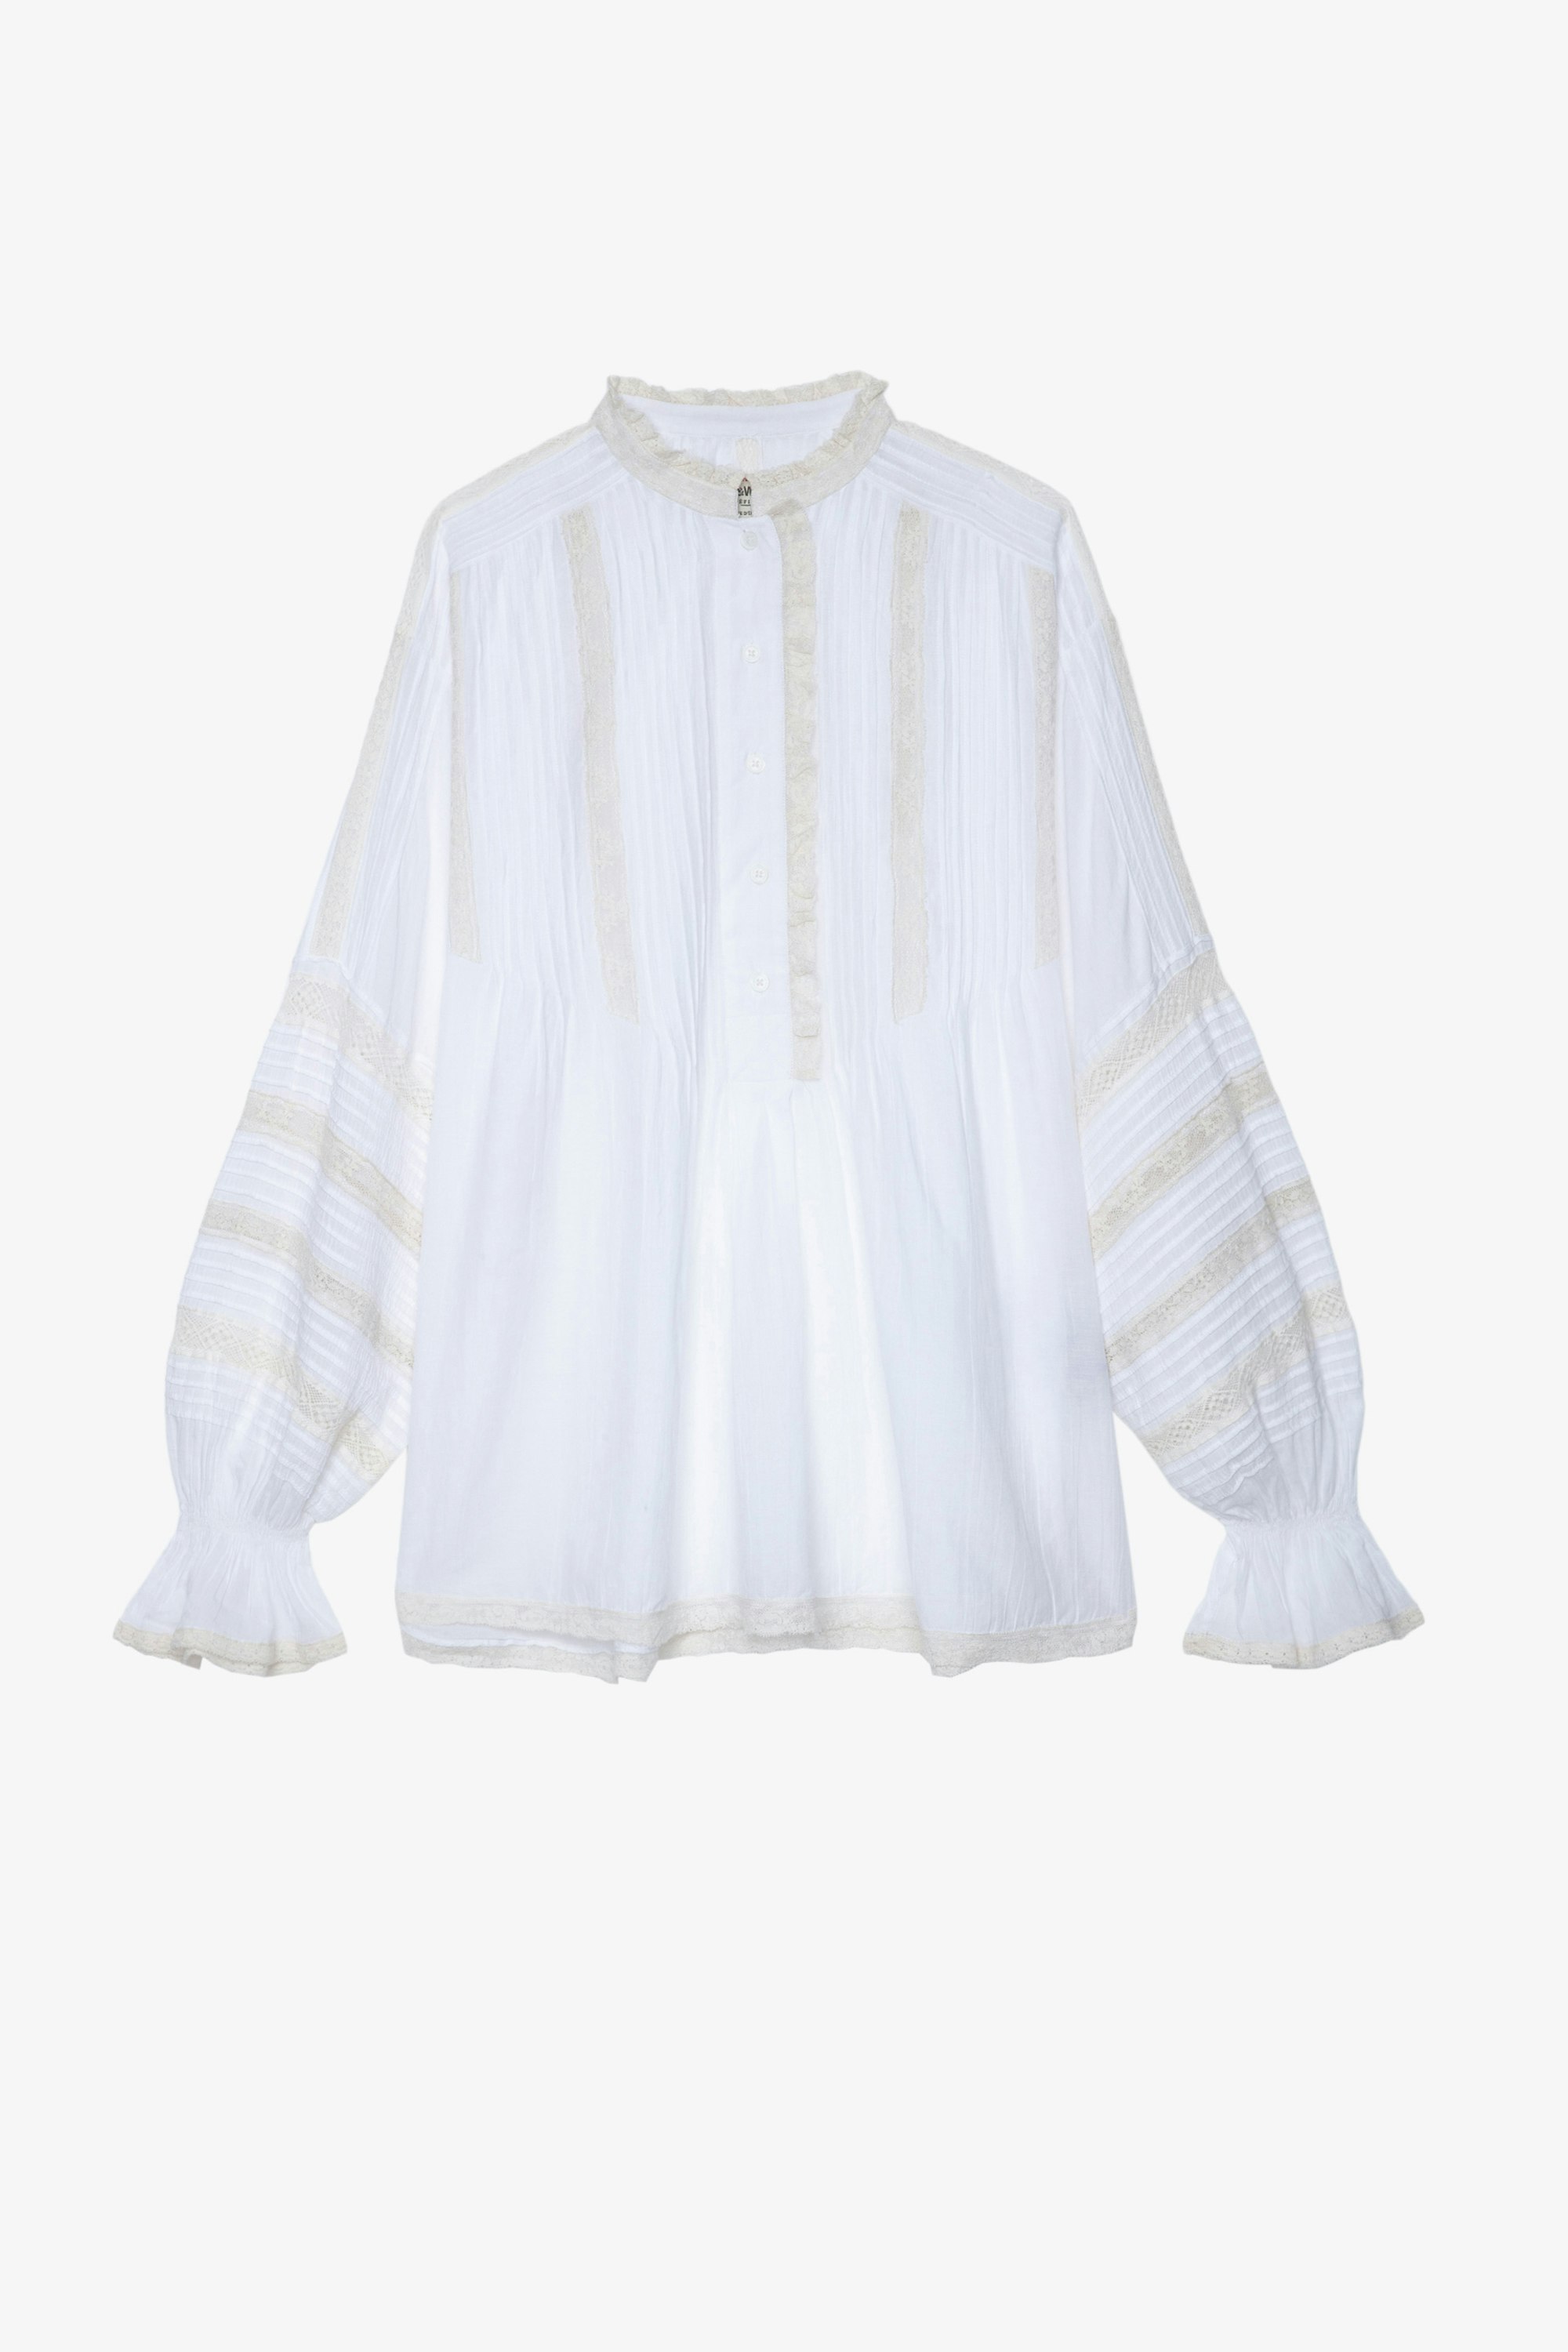 Tritelia Blouse - Women's white blouse with lace strips and oversize sleeves